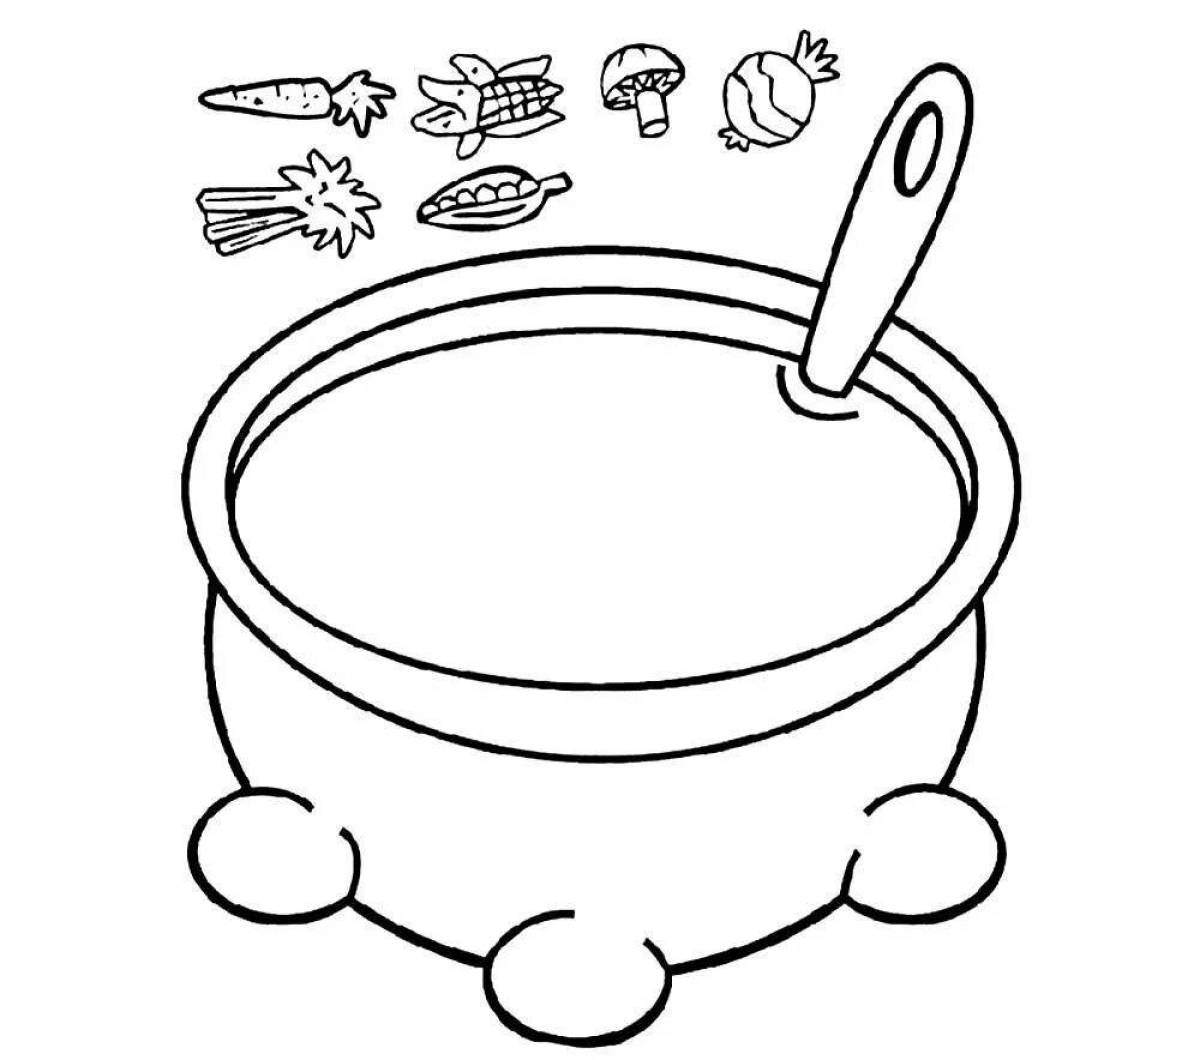 Coloring book cute saucepan for children 3-4 years old